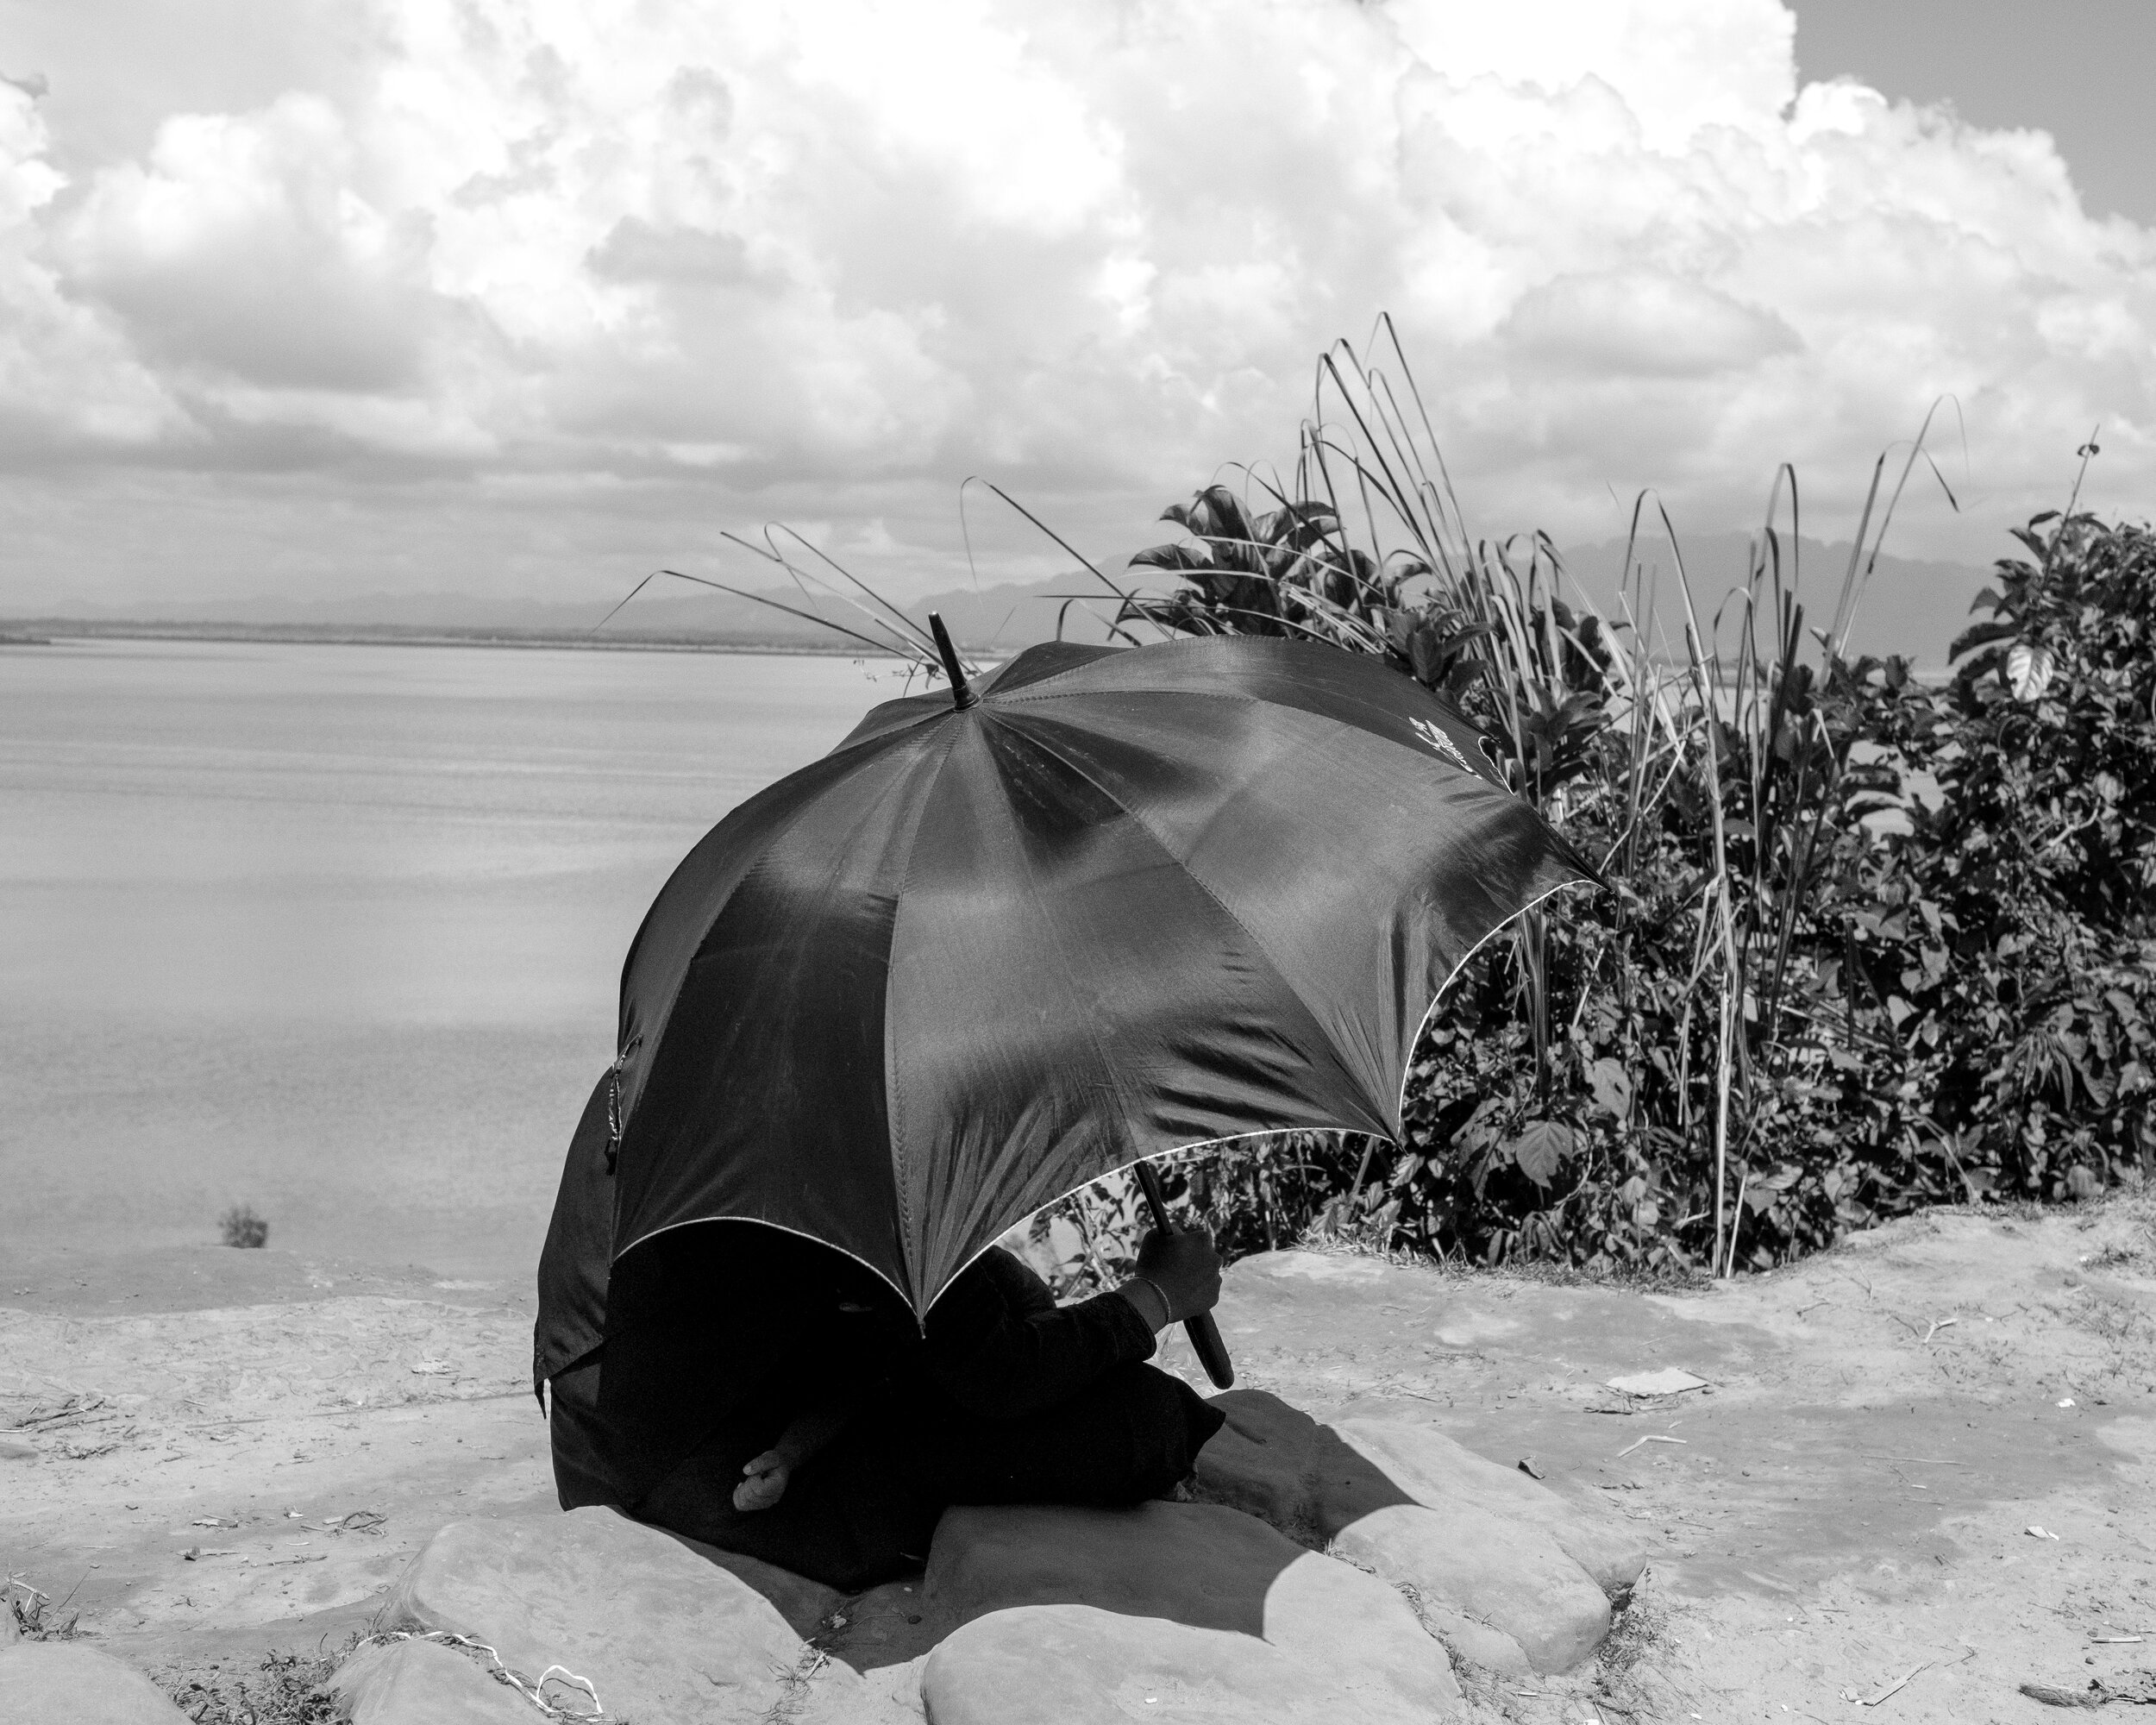  In Teknaf, a Rohingya woman and her baby in front of the Naf River, which marks the border between Myanmar and Bangladesh, protect themselves from the sun with an umbrella. 